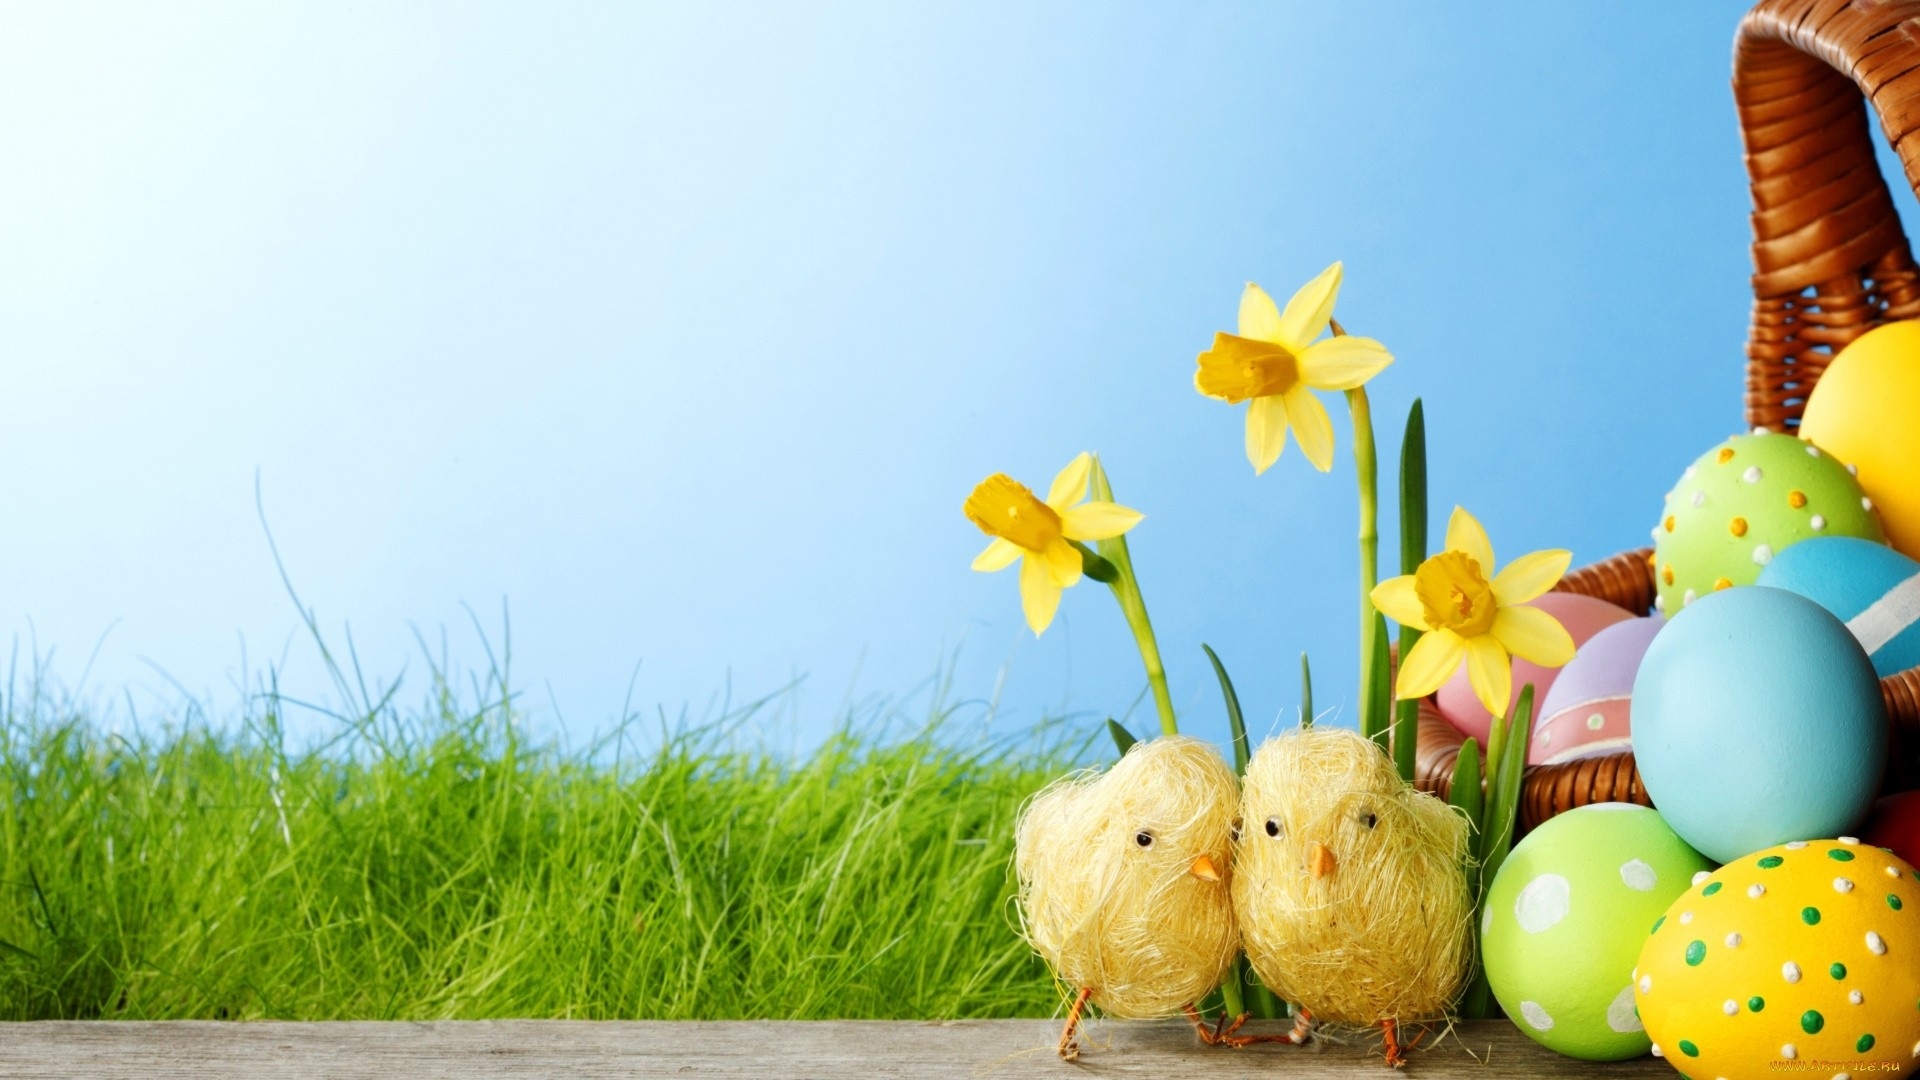 Background For Easter Card HD Wallpaper